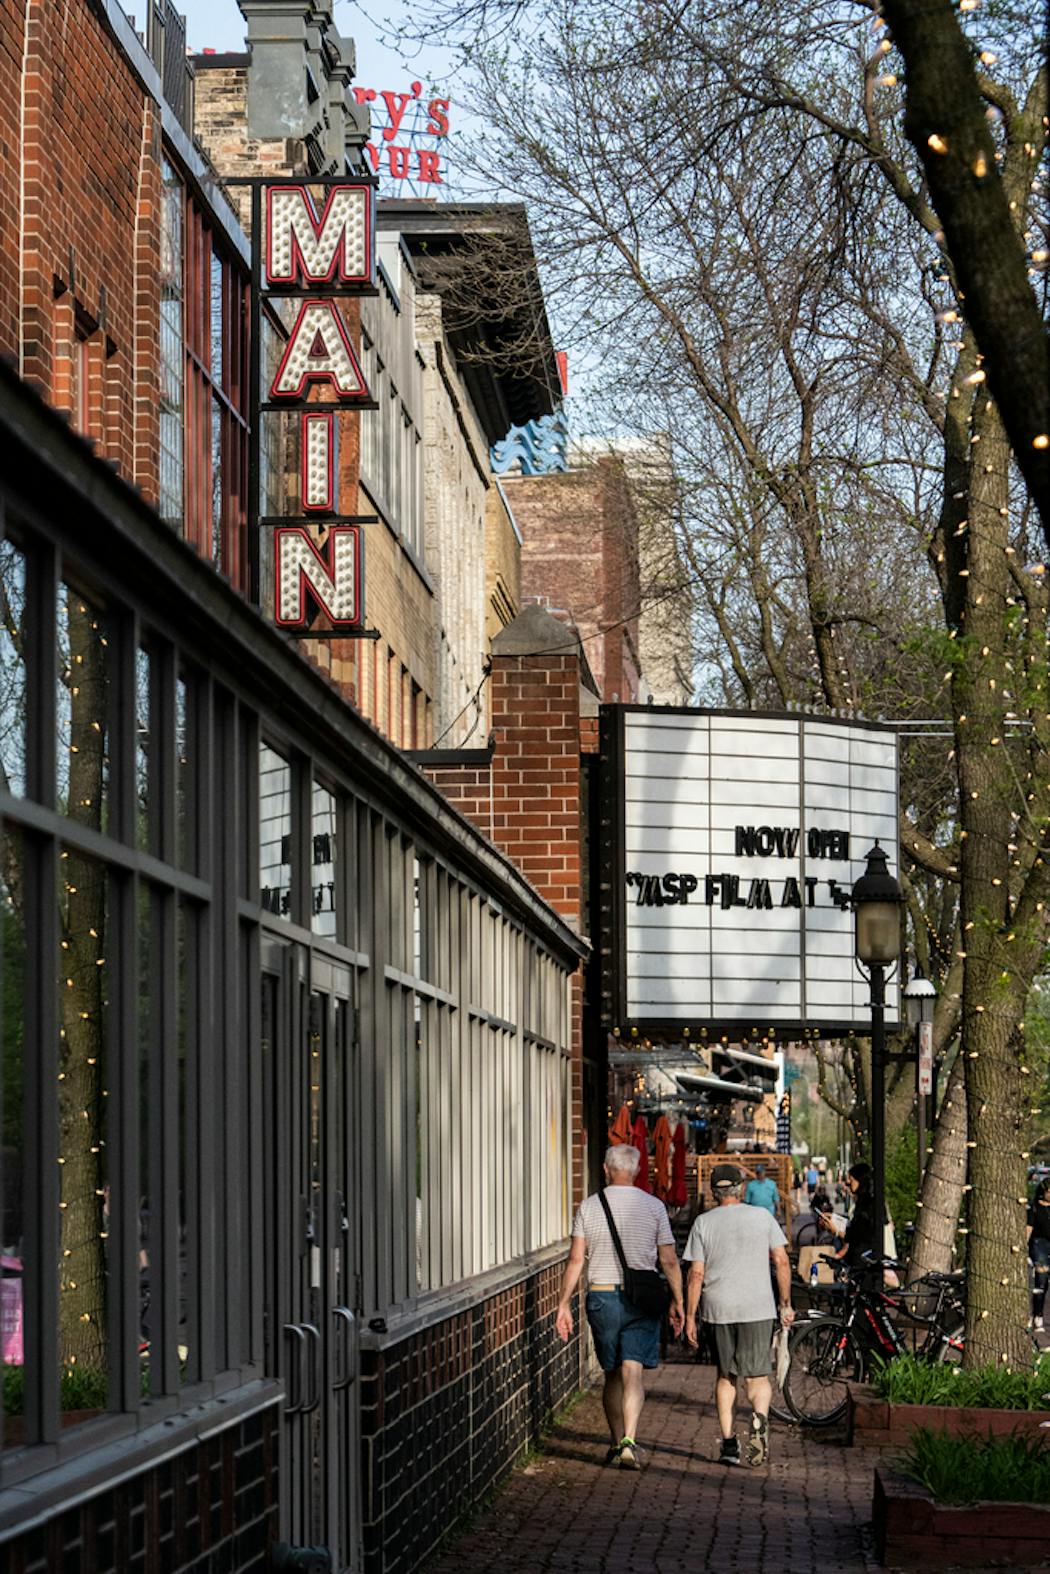 The theater’s Minneapolis riverfront location on Main Street SE. offers views of the skyline.